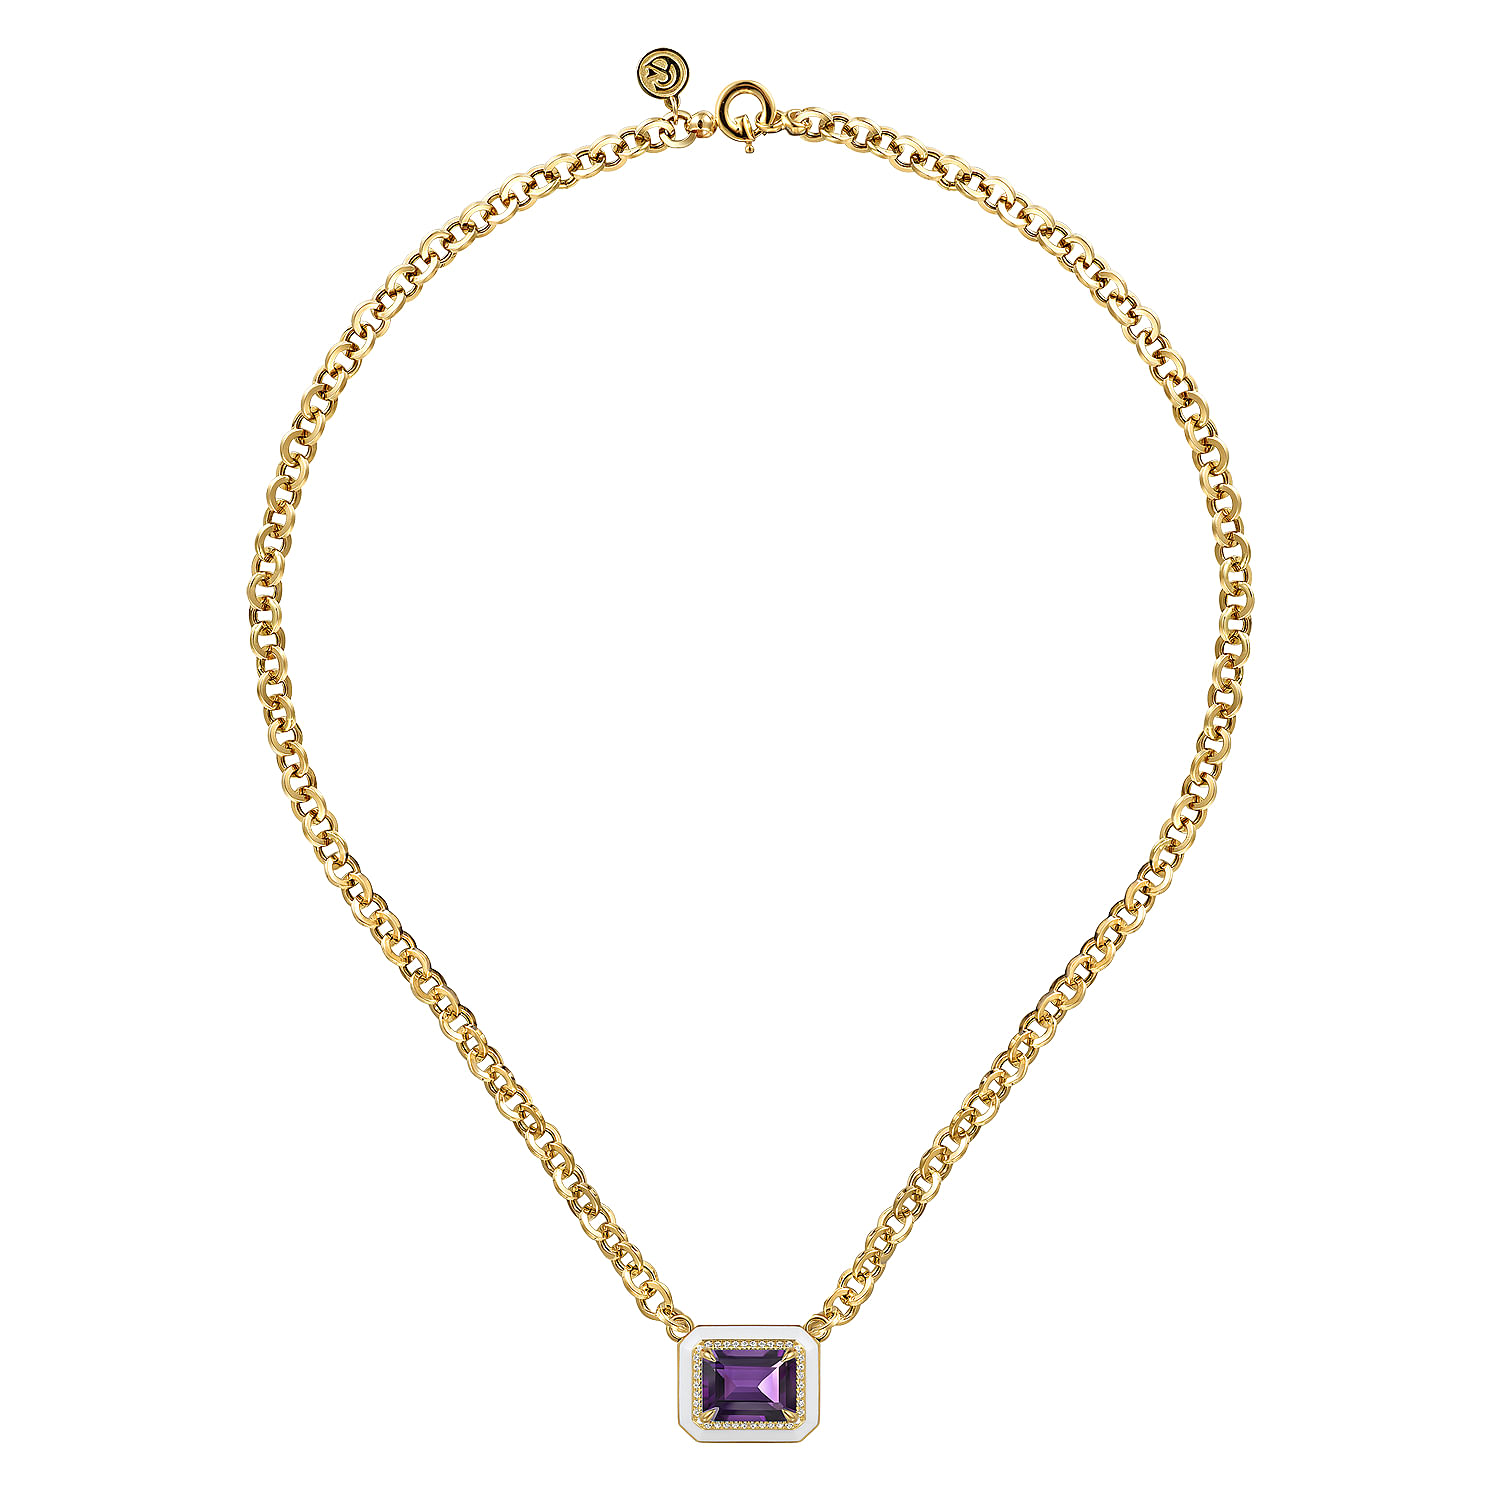 14K Yellow Gold Diamond and Amethyst Emerald Cut Necklace With Flower Pattern J-Back and White Enamel